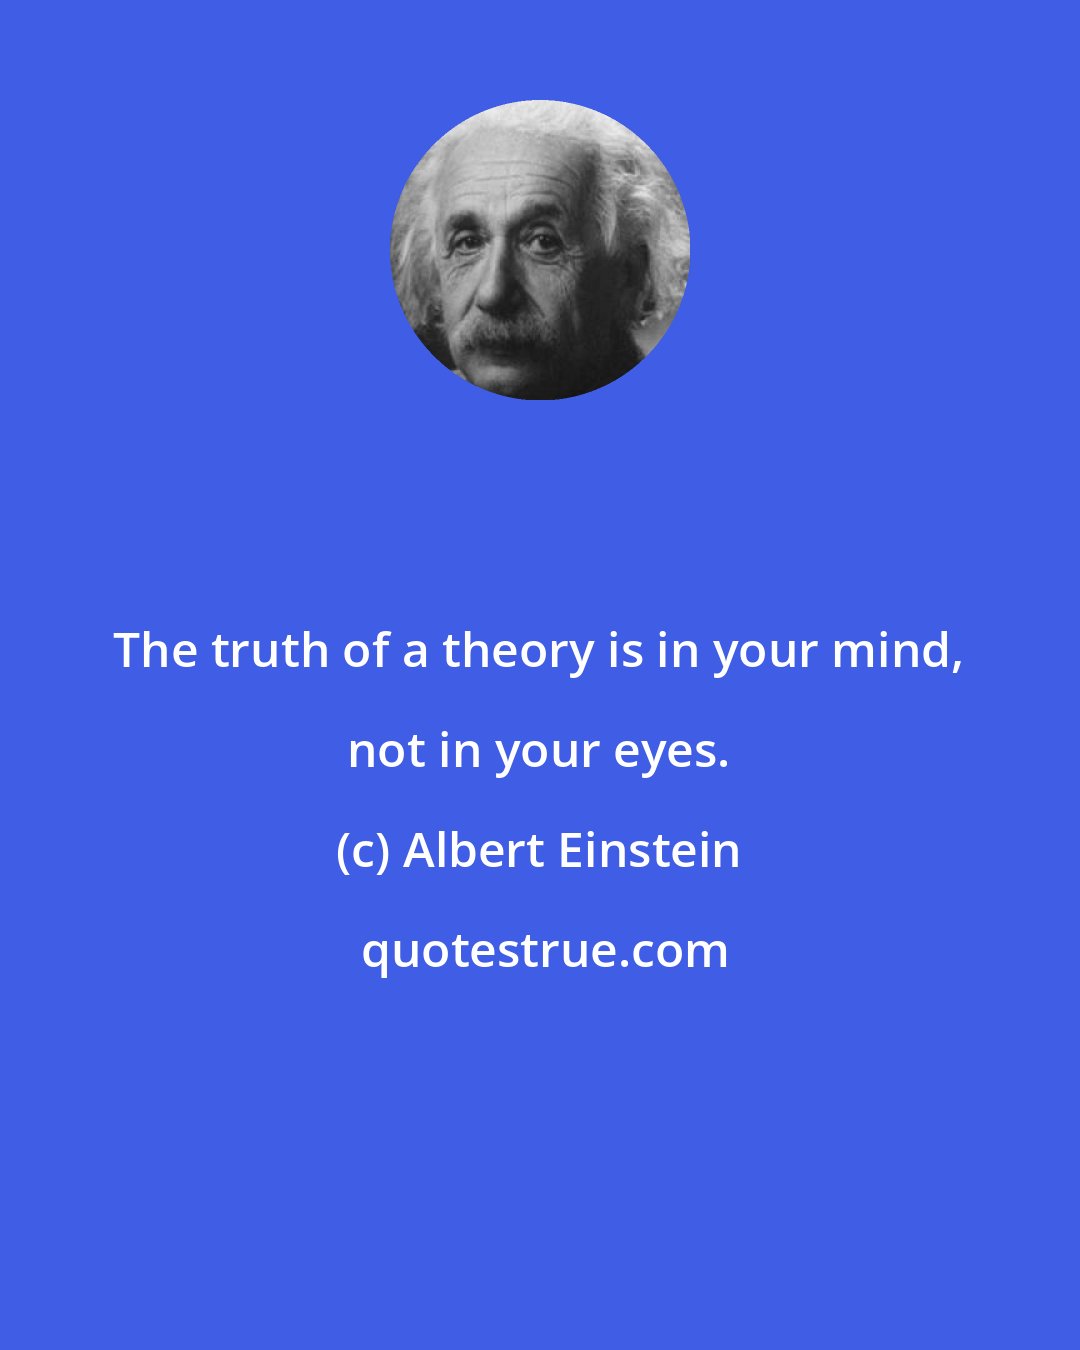 Albert Einstein: The truth of a theory is in your mind, not in your eyes.